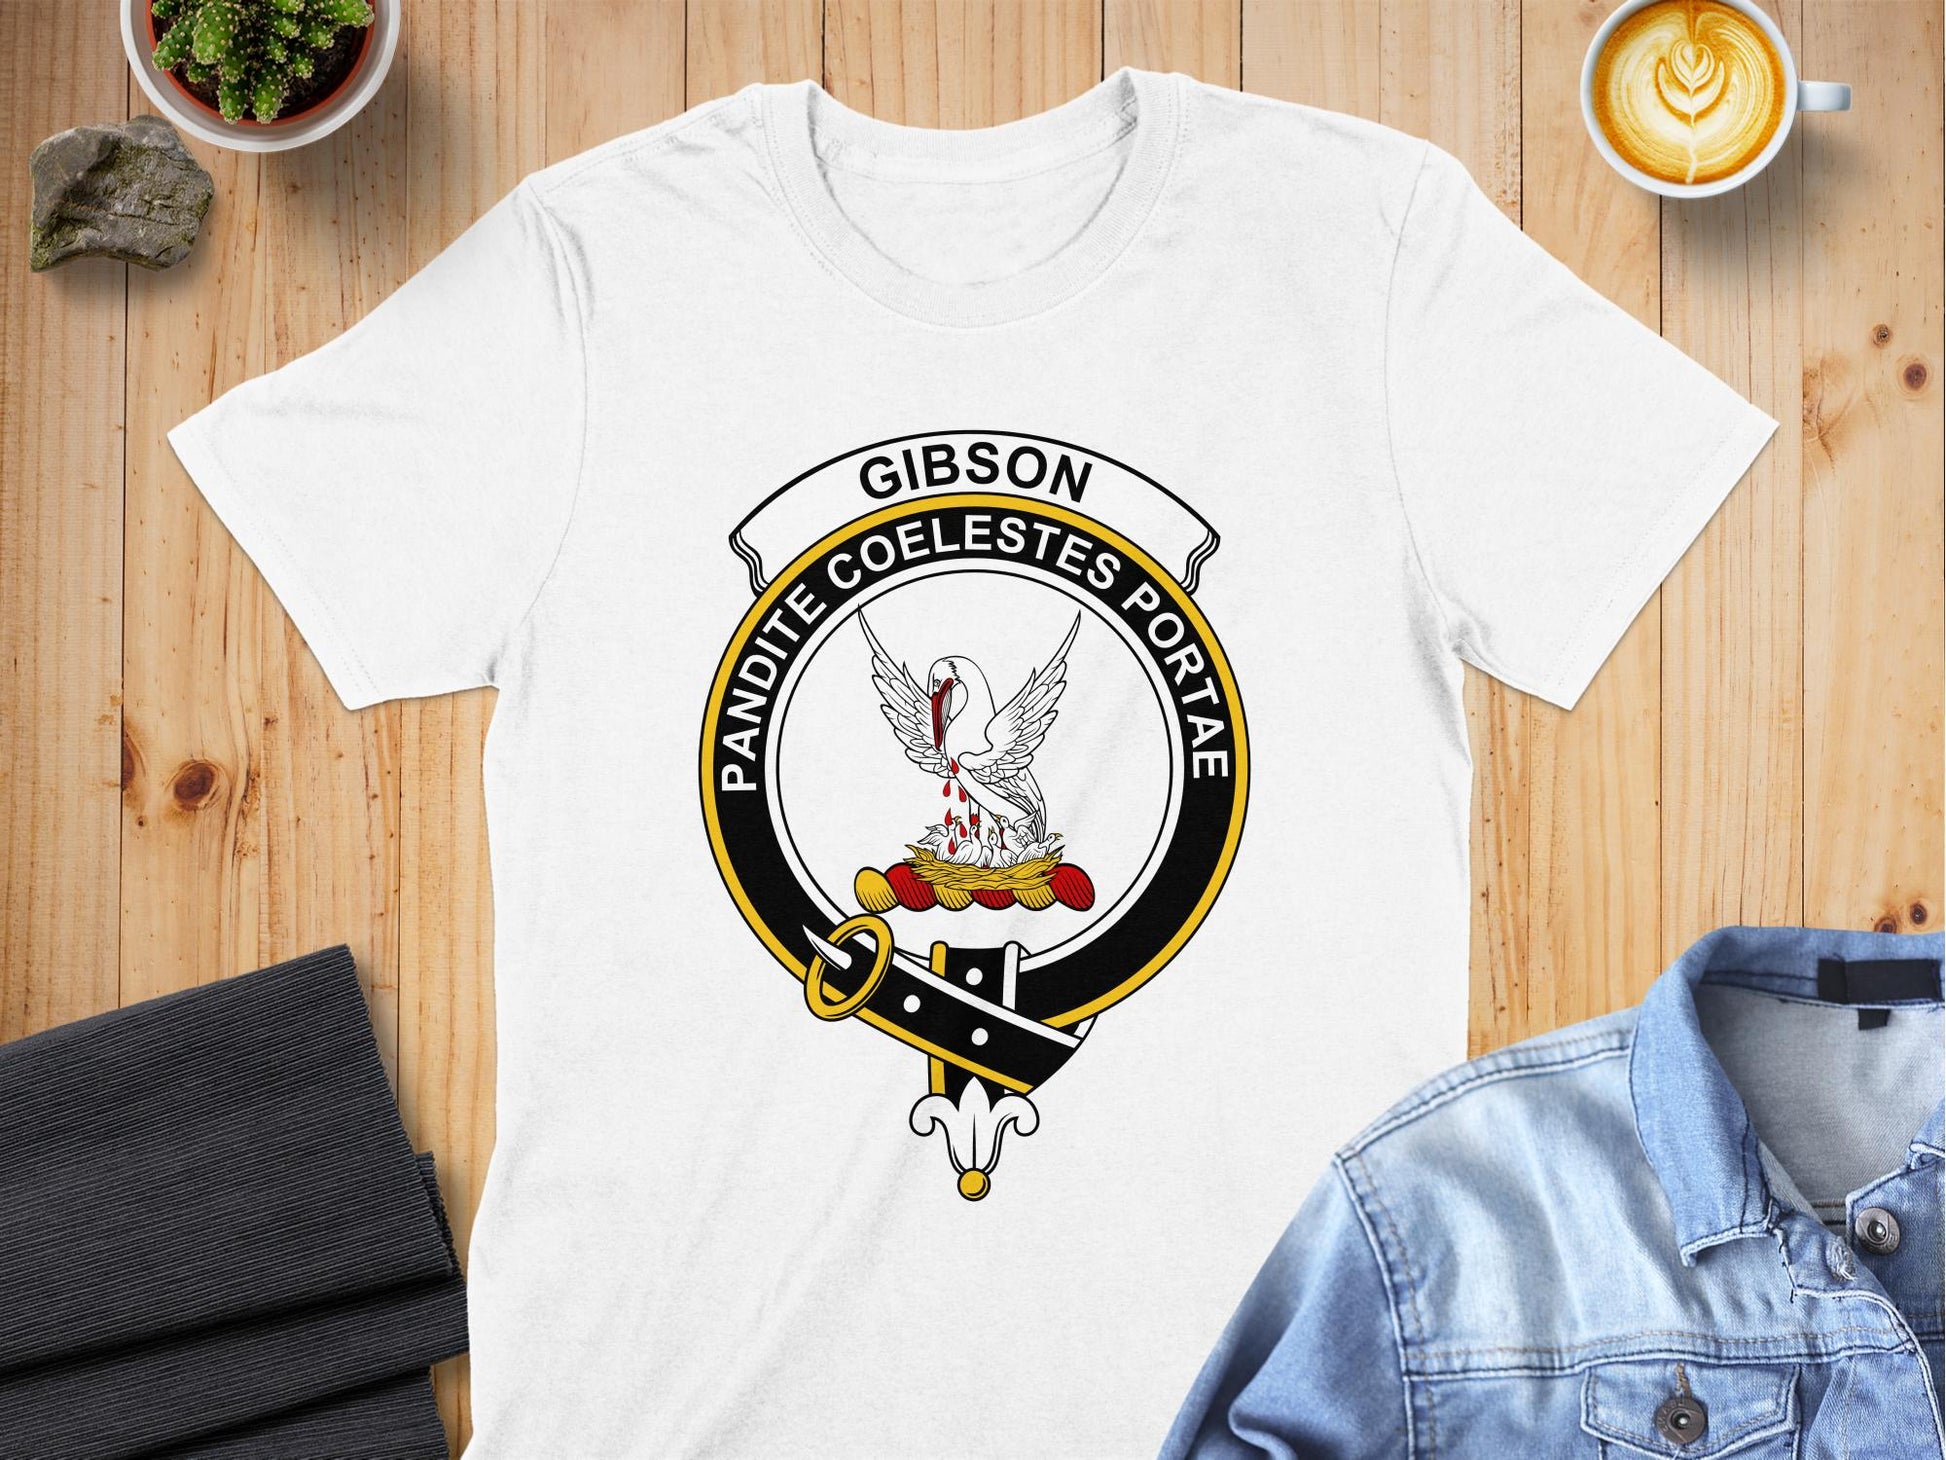 Gibson Scottish Clan Crest Highland Games T-Shirt - Living Stone Gifts